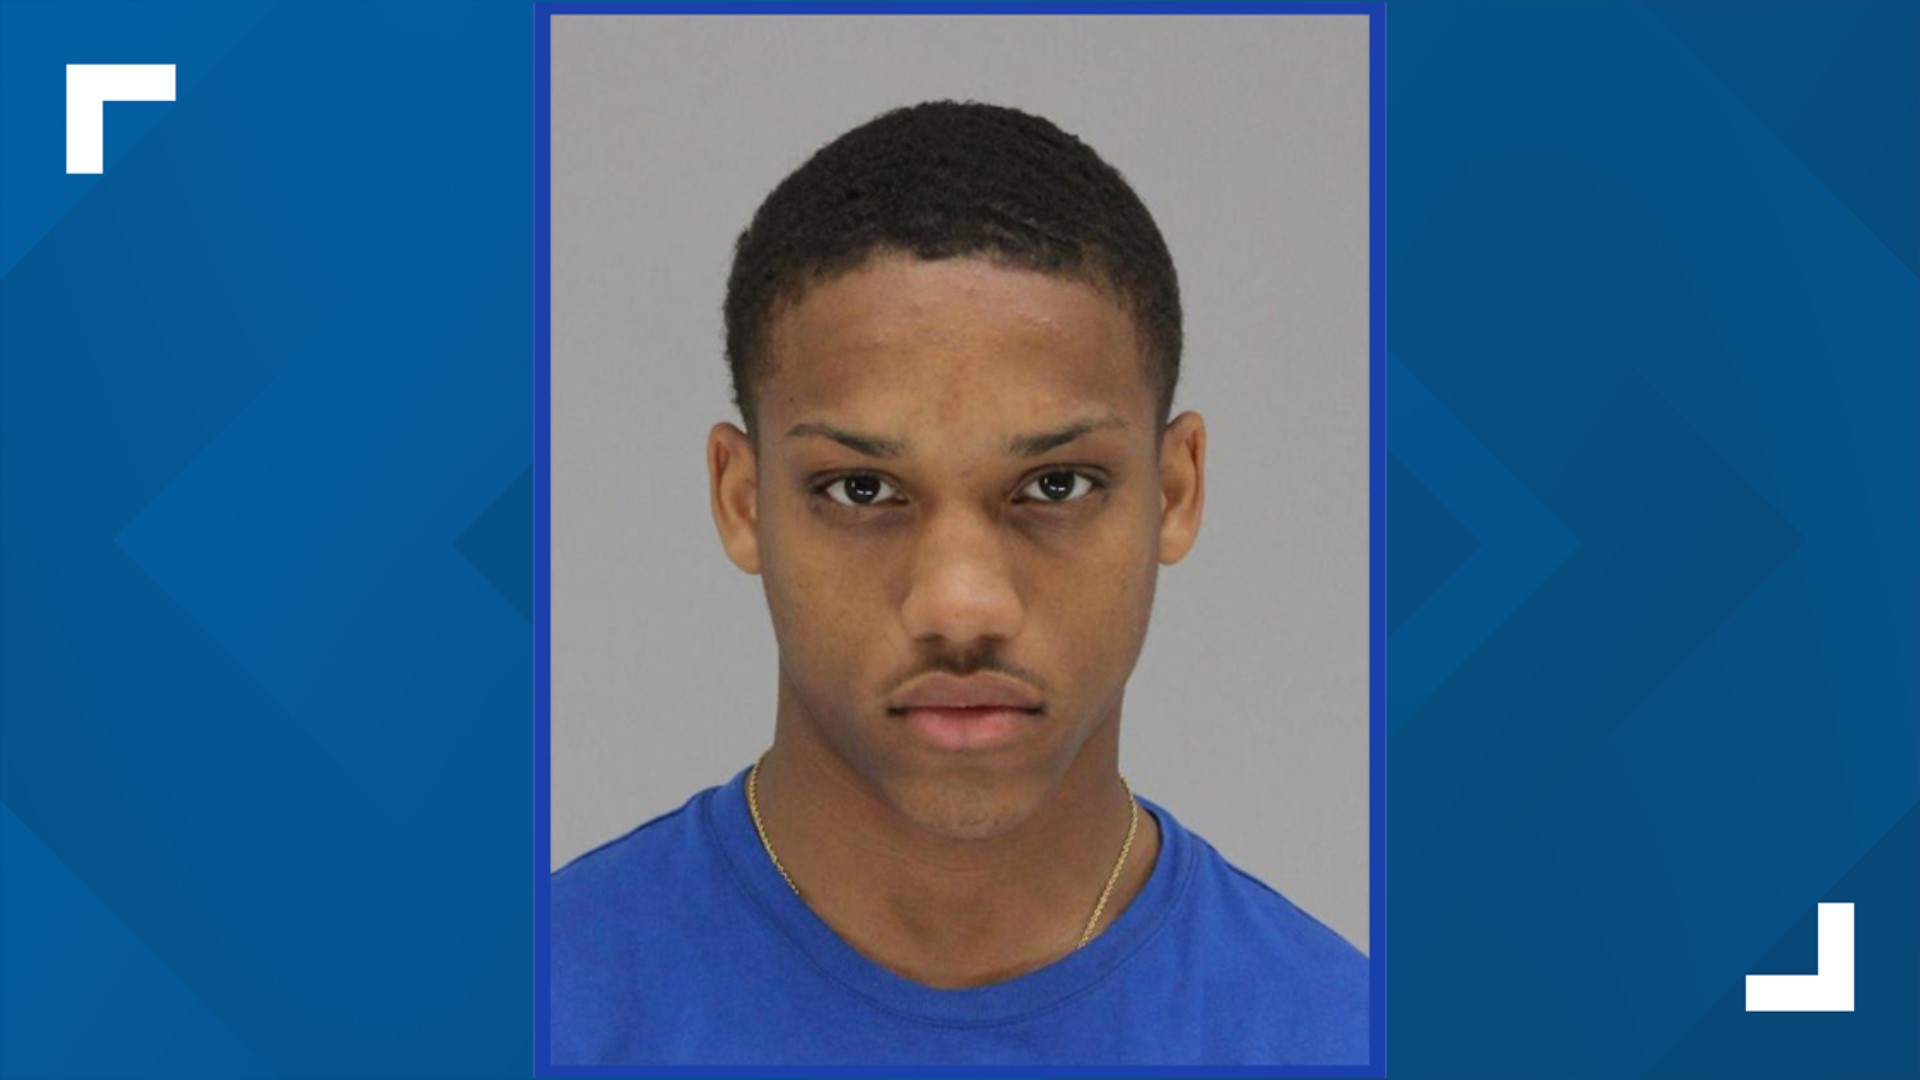 Tyrese Simmons, 23, went missing days before his murder trial. He has been arrested in Tulsa, Oklahoma, police announced.